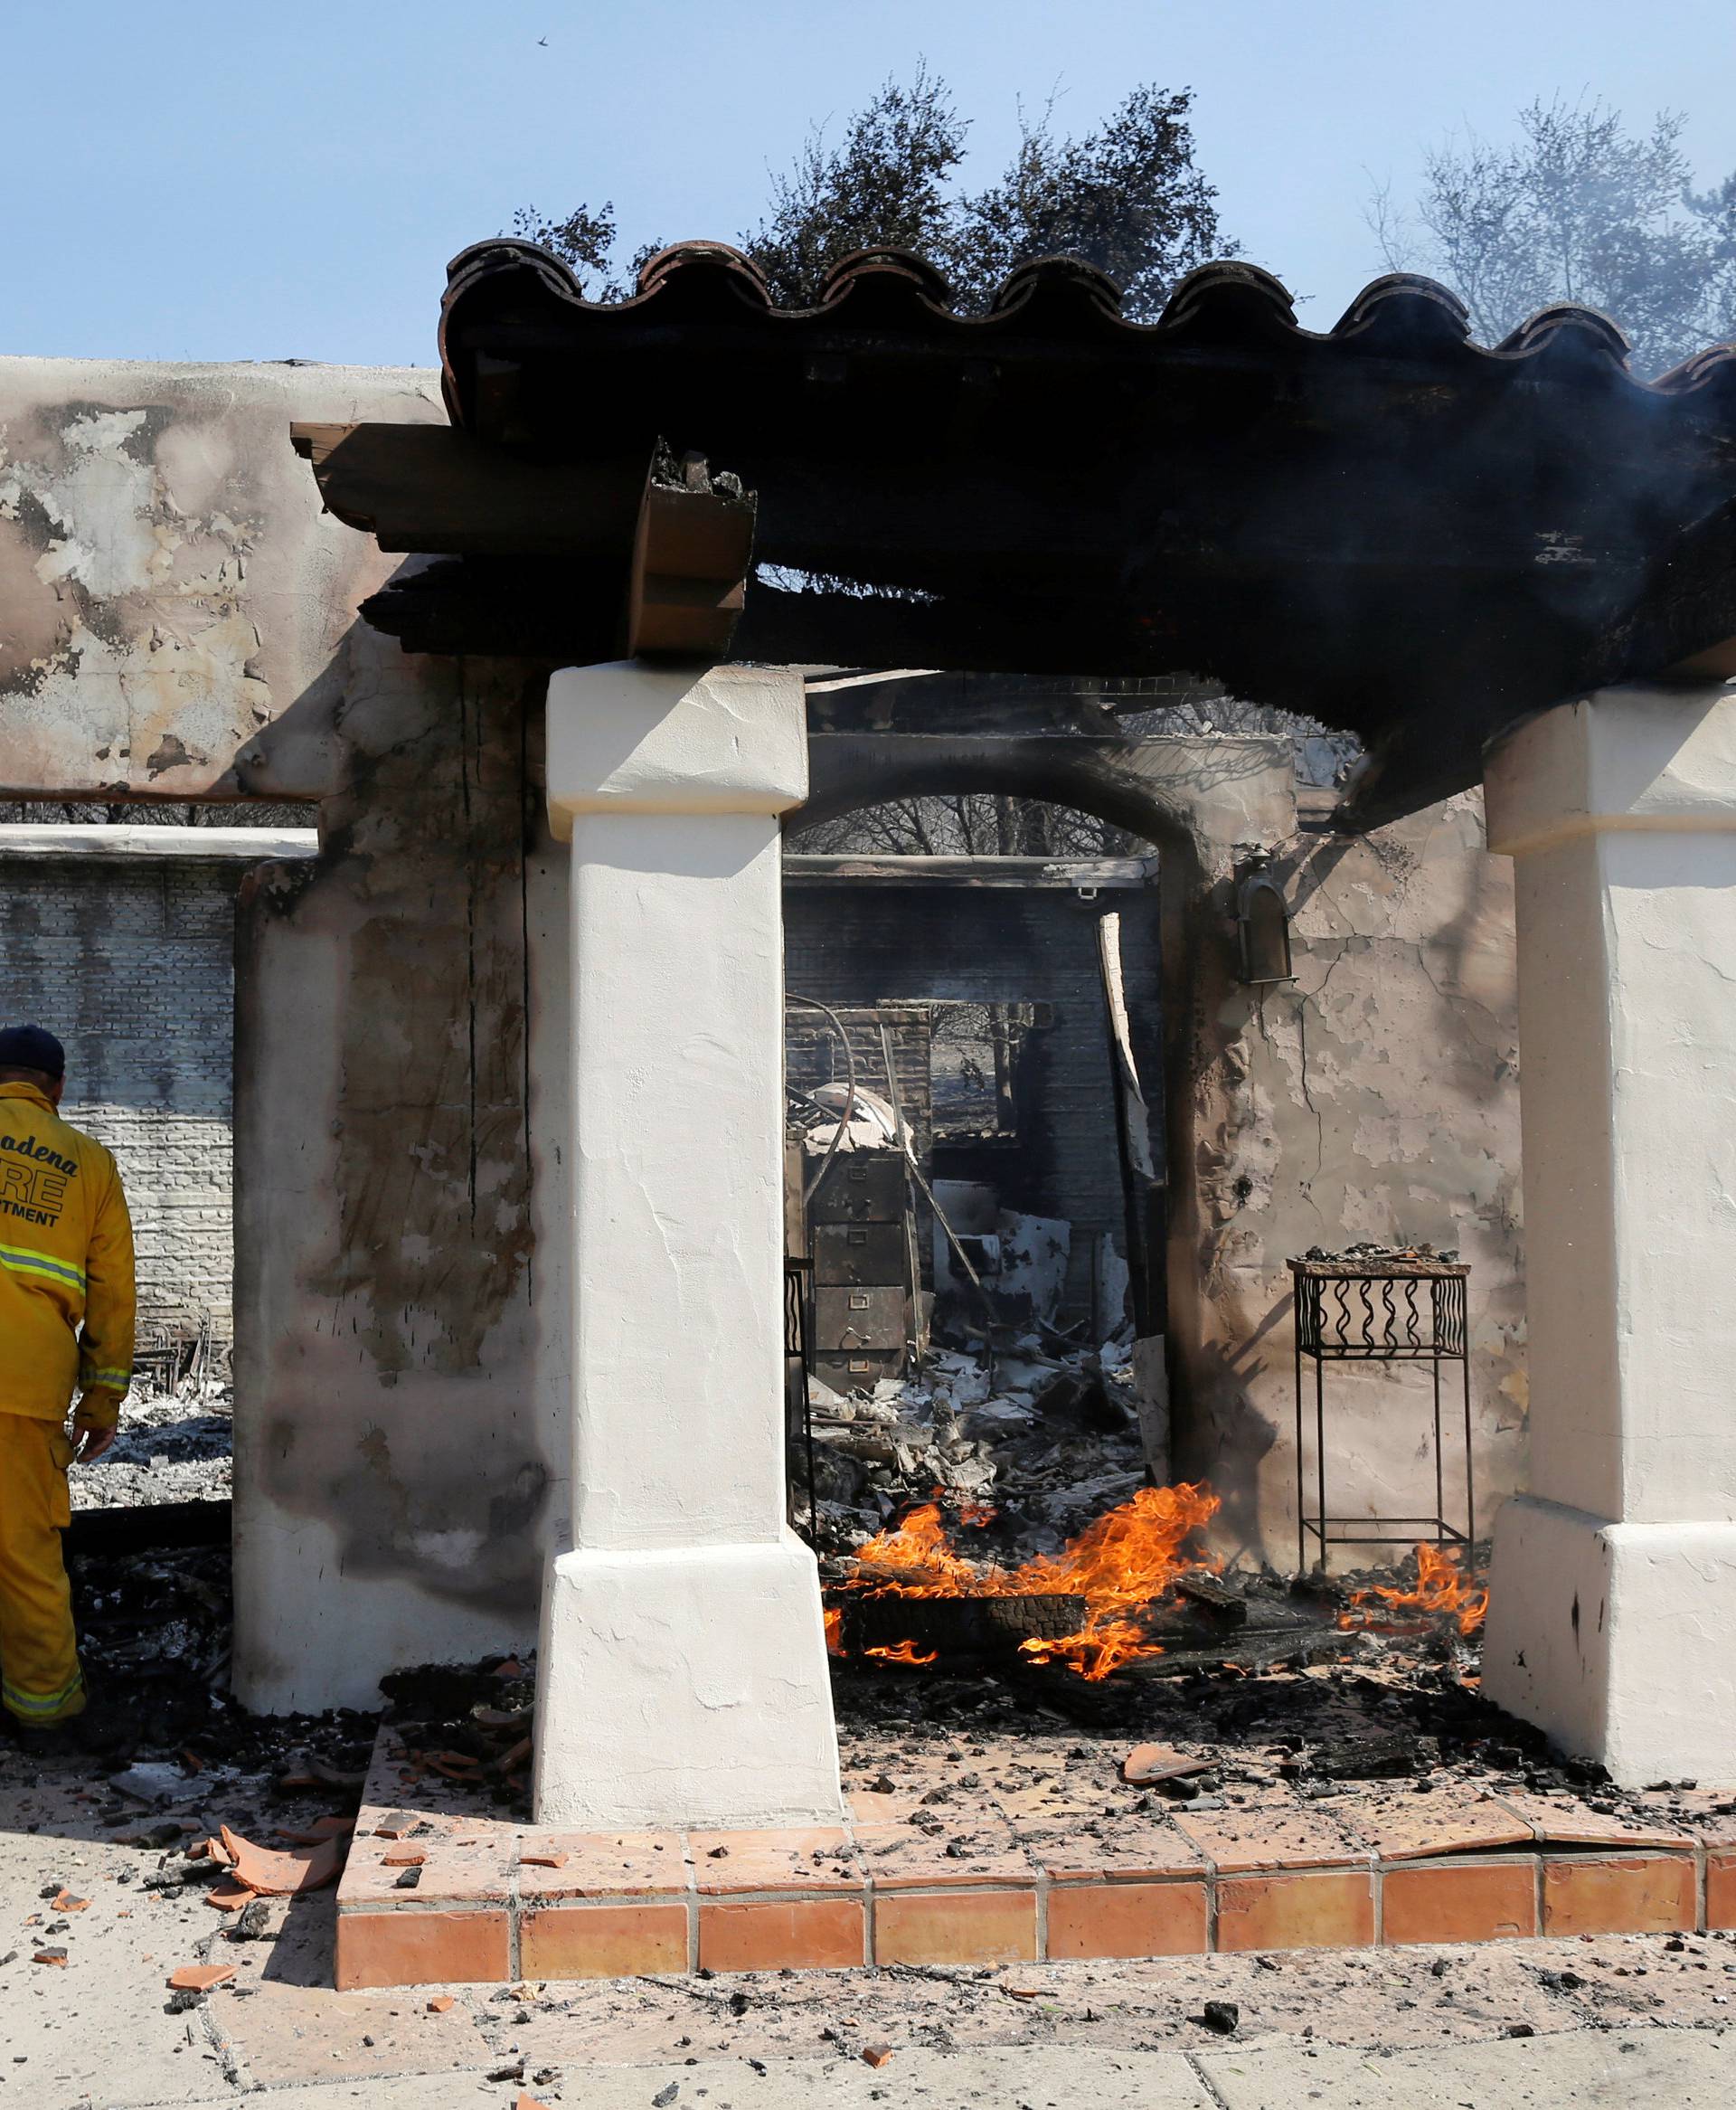 A firefighter checks a home that was burned in the so-called Sand Fire in the Angeles National Forest near Los Angeles